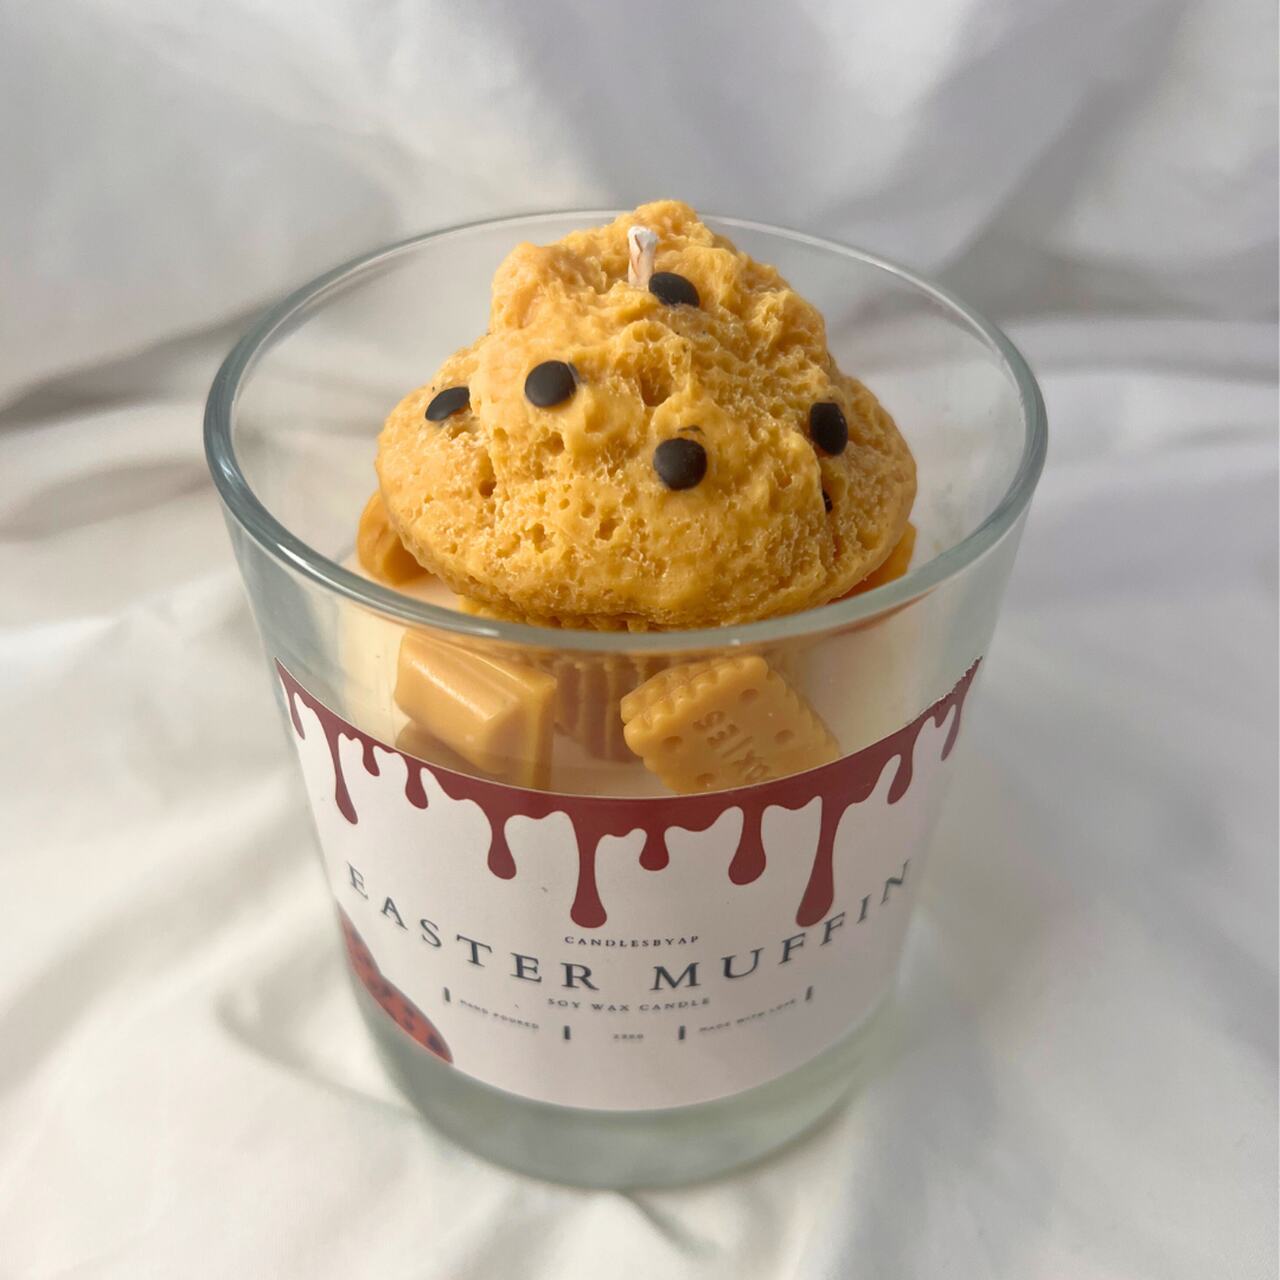 Easter Muffin Candle